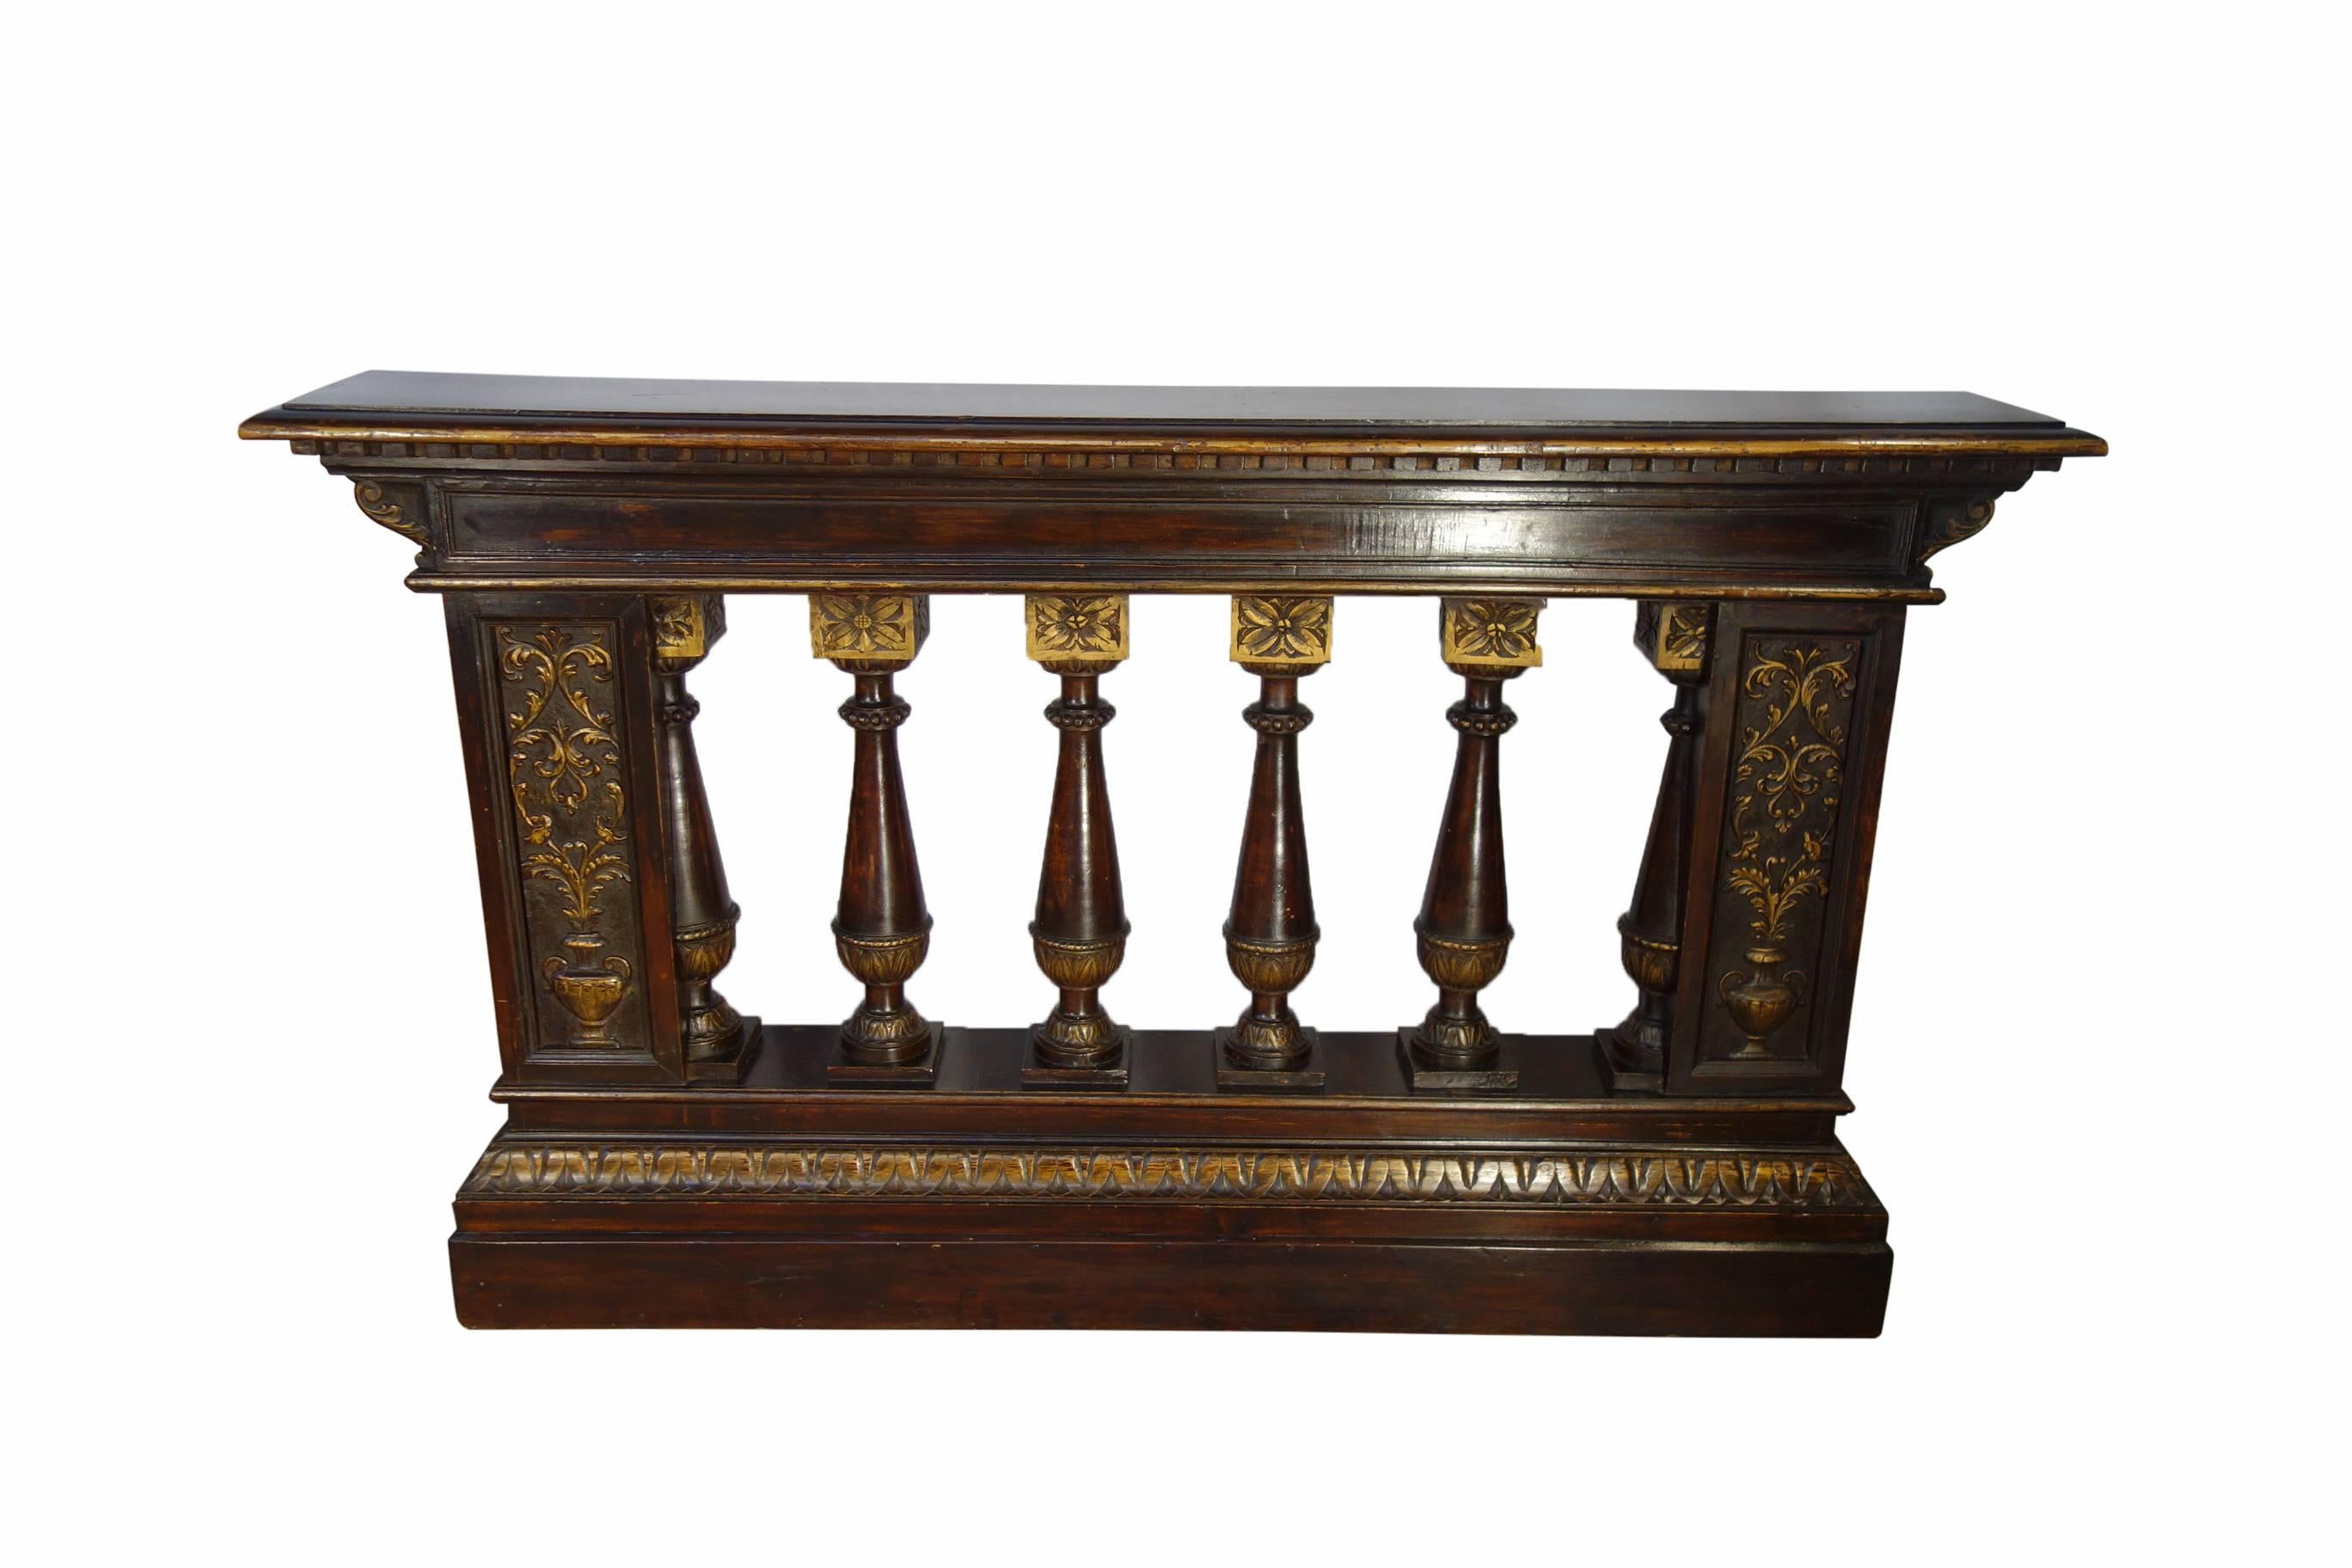 Wood 19th Century Italian Balustrade with Renaissance Carvings and Gold Gilt Ca 1850